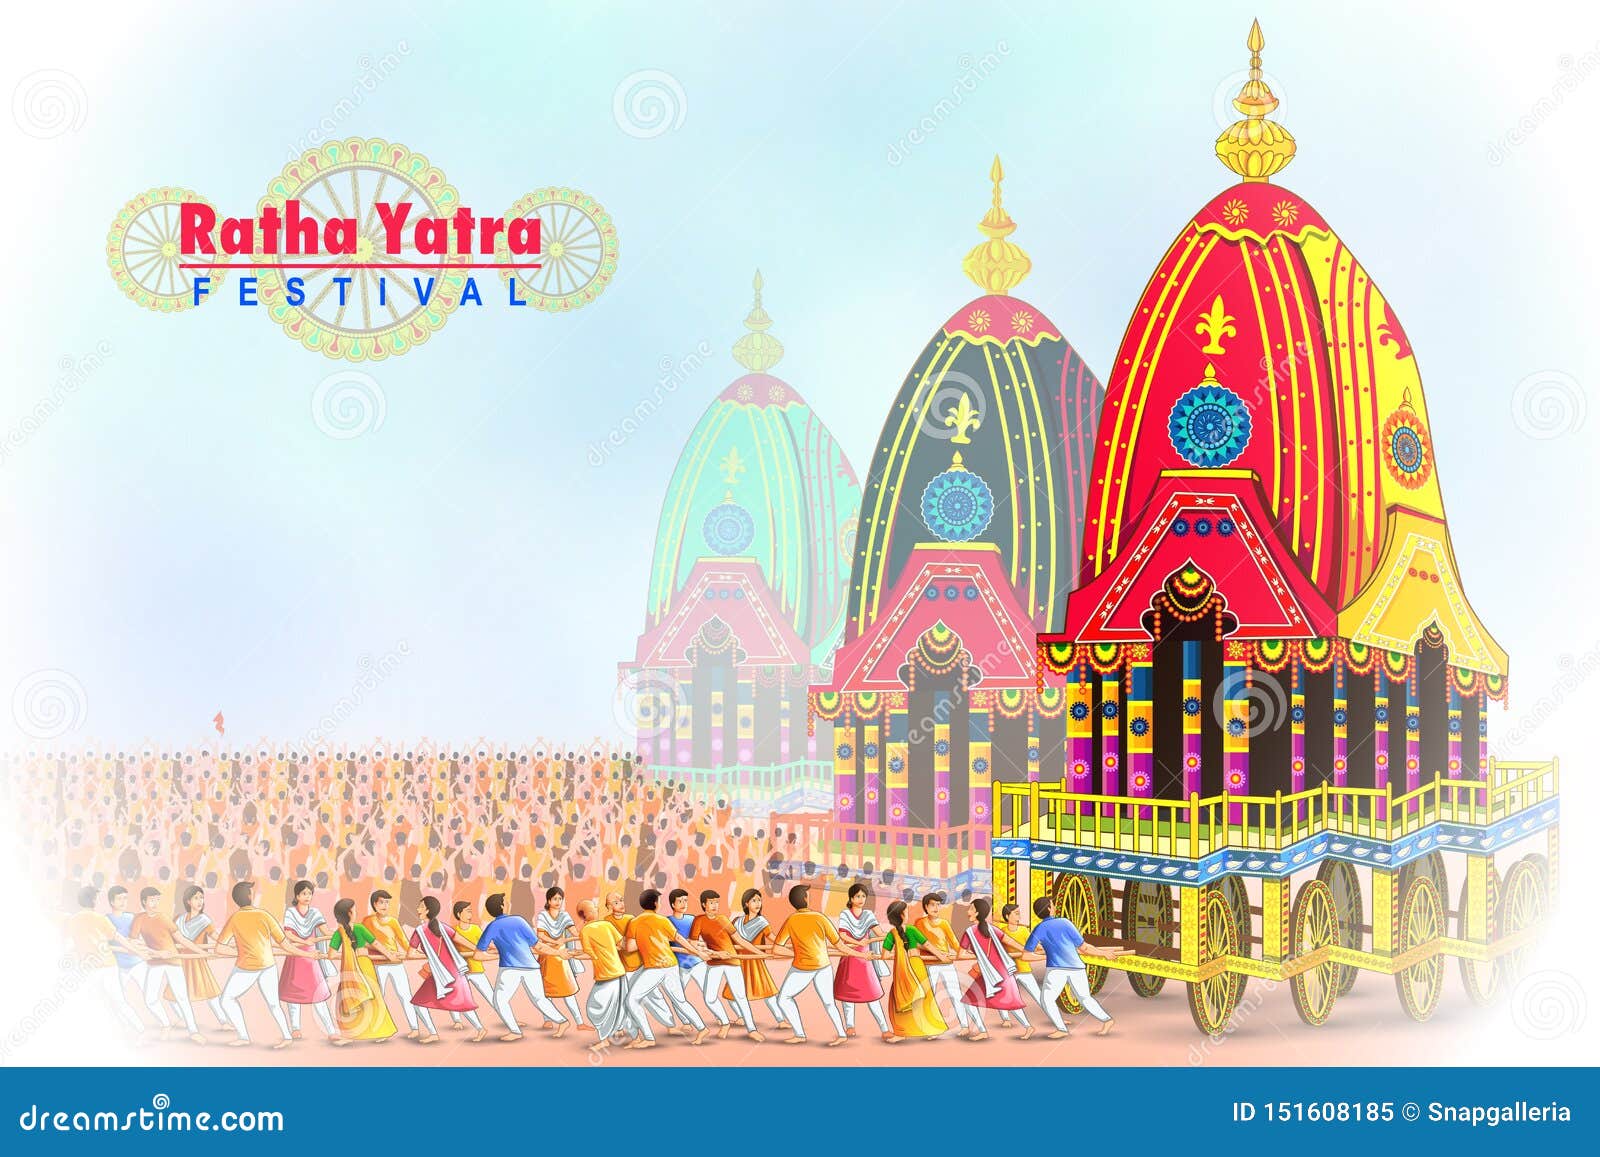 Rath Yatra Drawing Watercolor | Rath Yatra watercolor drawing easy | Art  With Sudip | How to Draw Rath Yatra Drawing 2021, Rath Yatra Water Colour  Painting of Puri, rath yatra watercolor